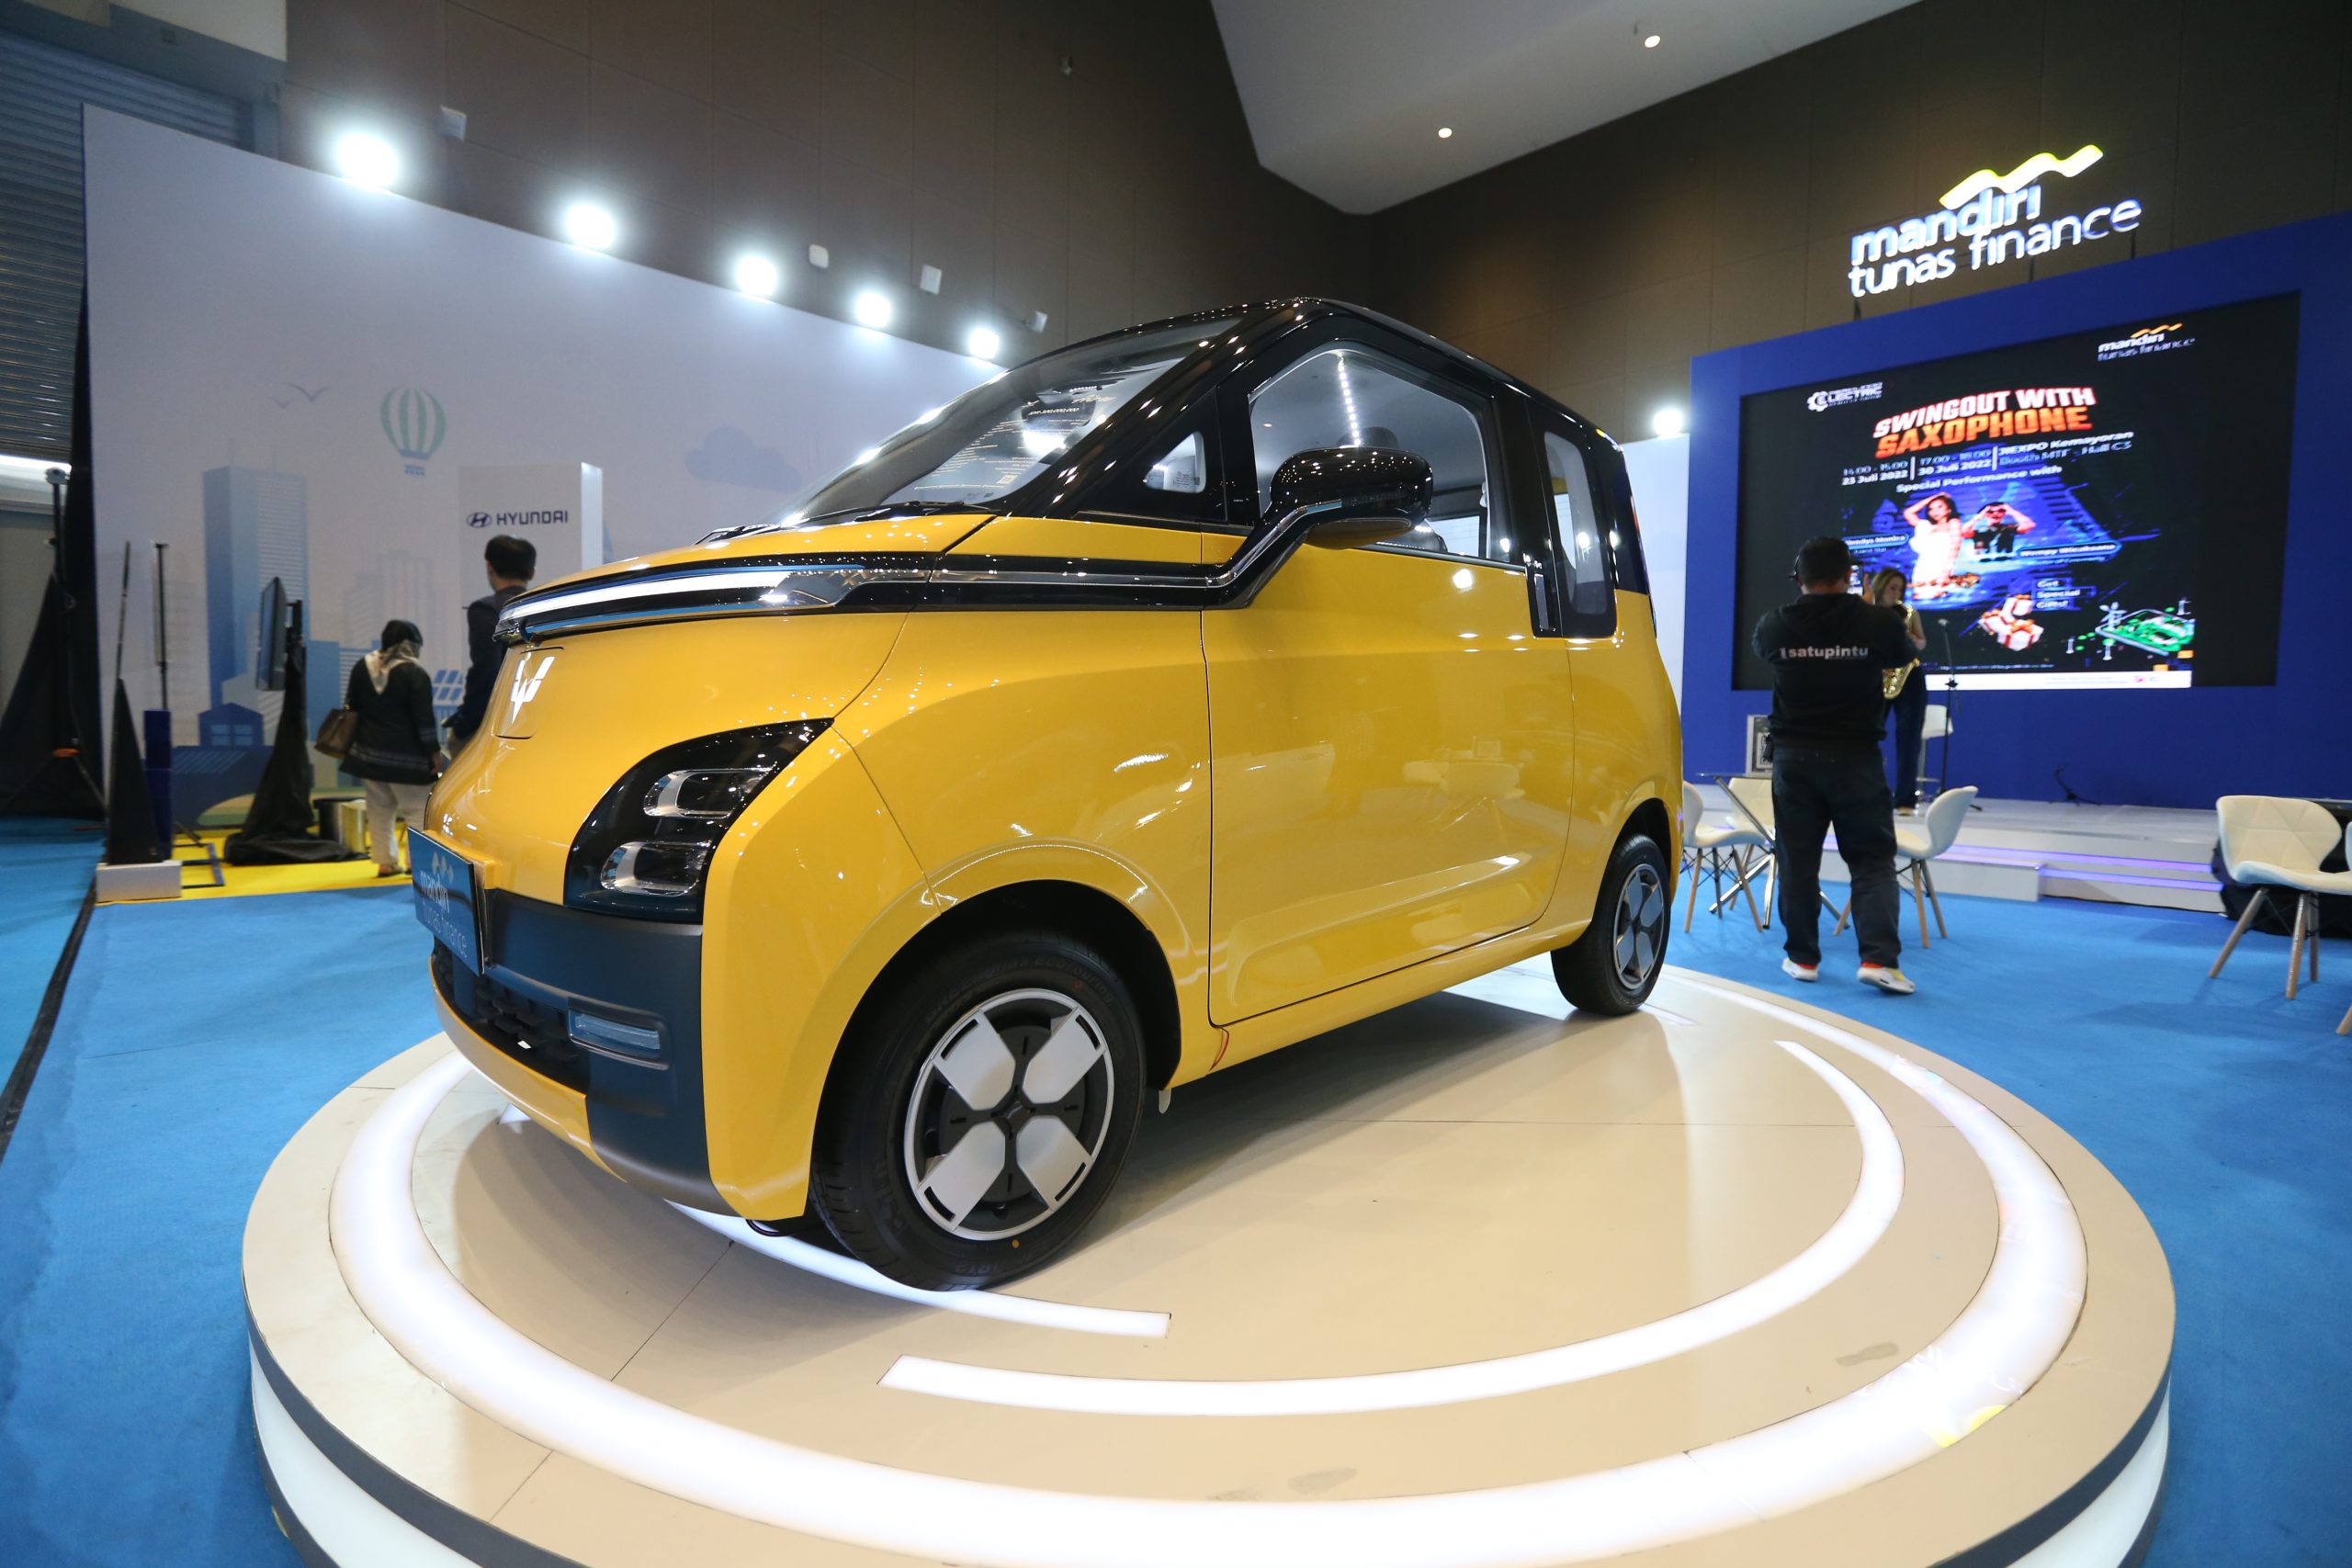 DAY 2 (PERIKLINDO ELECTRIC VEHICLE SHOW 2022)